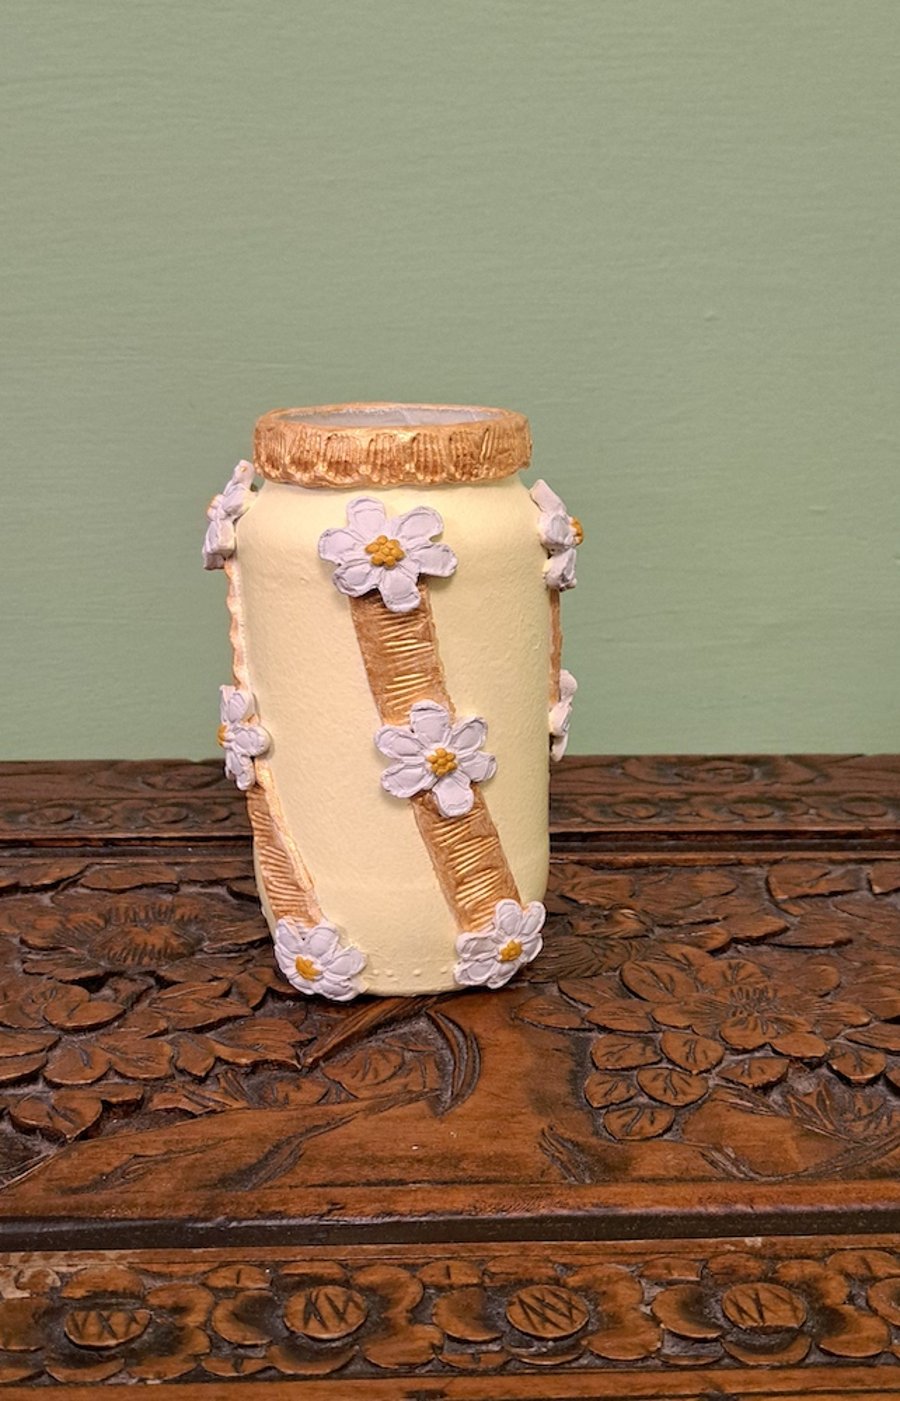 Handcrafted vase. Lemon & gold with daisies. From upcycled jar & air dry clay